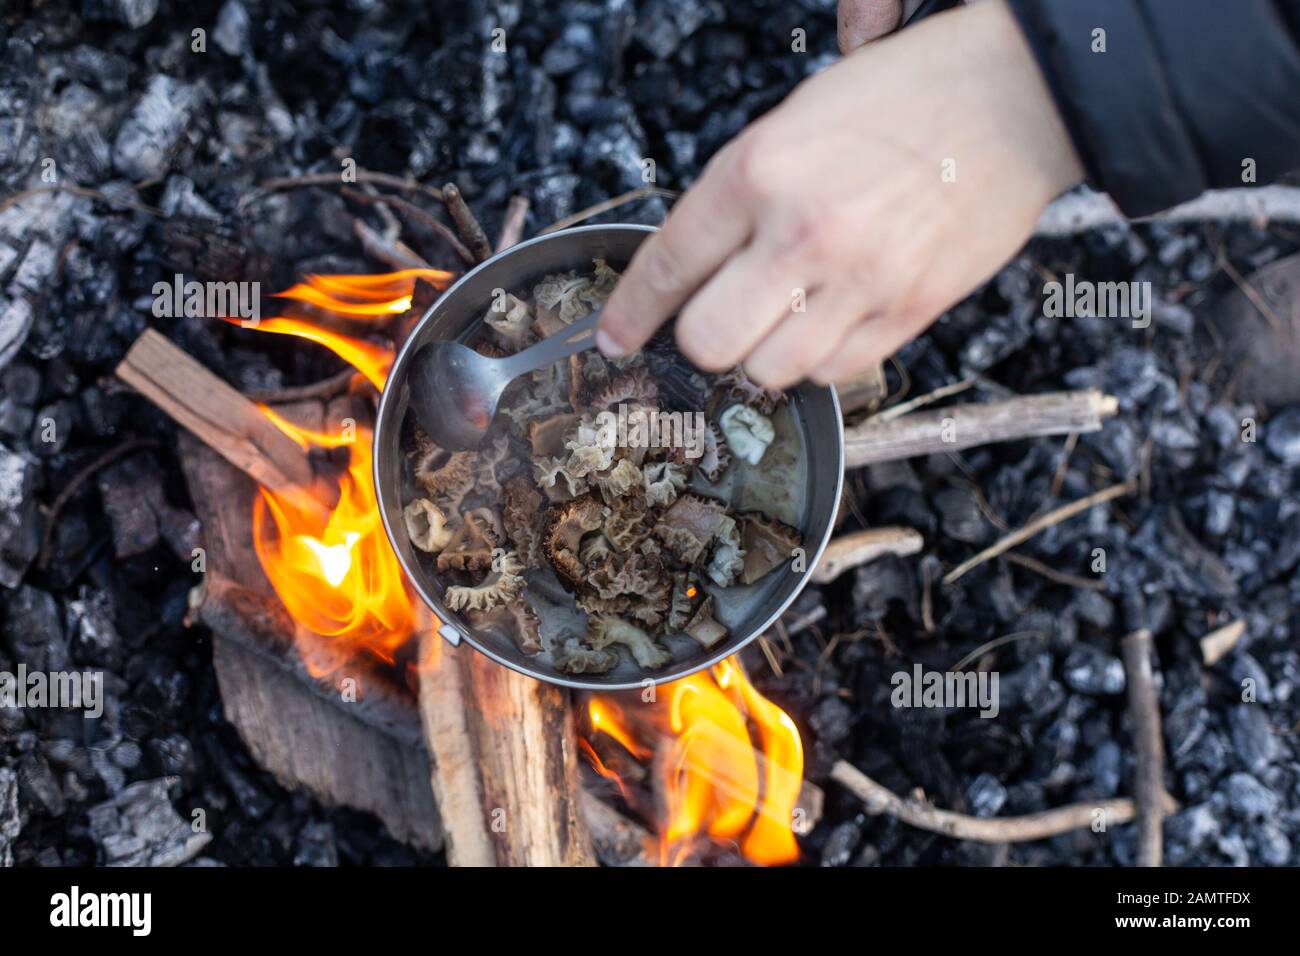 Woman Cooking wild mushrooms over a campfire Stock Photo